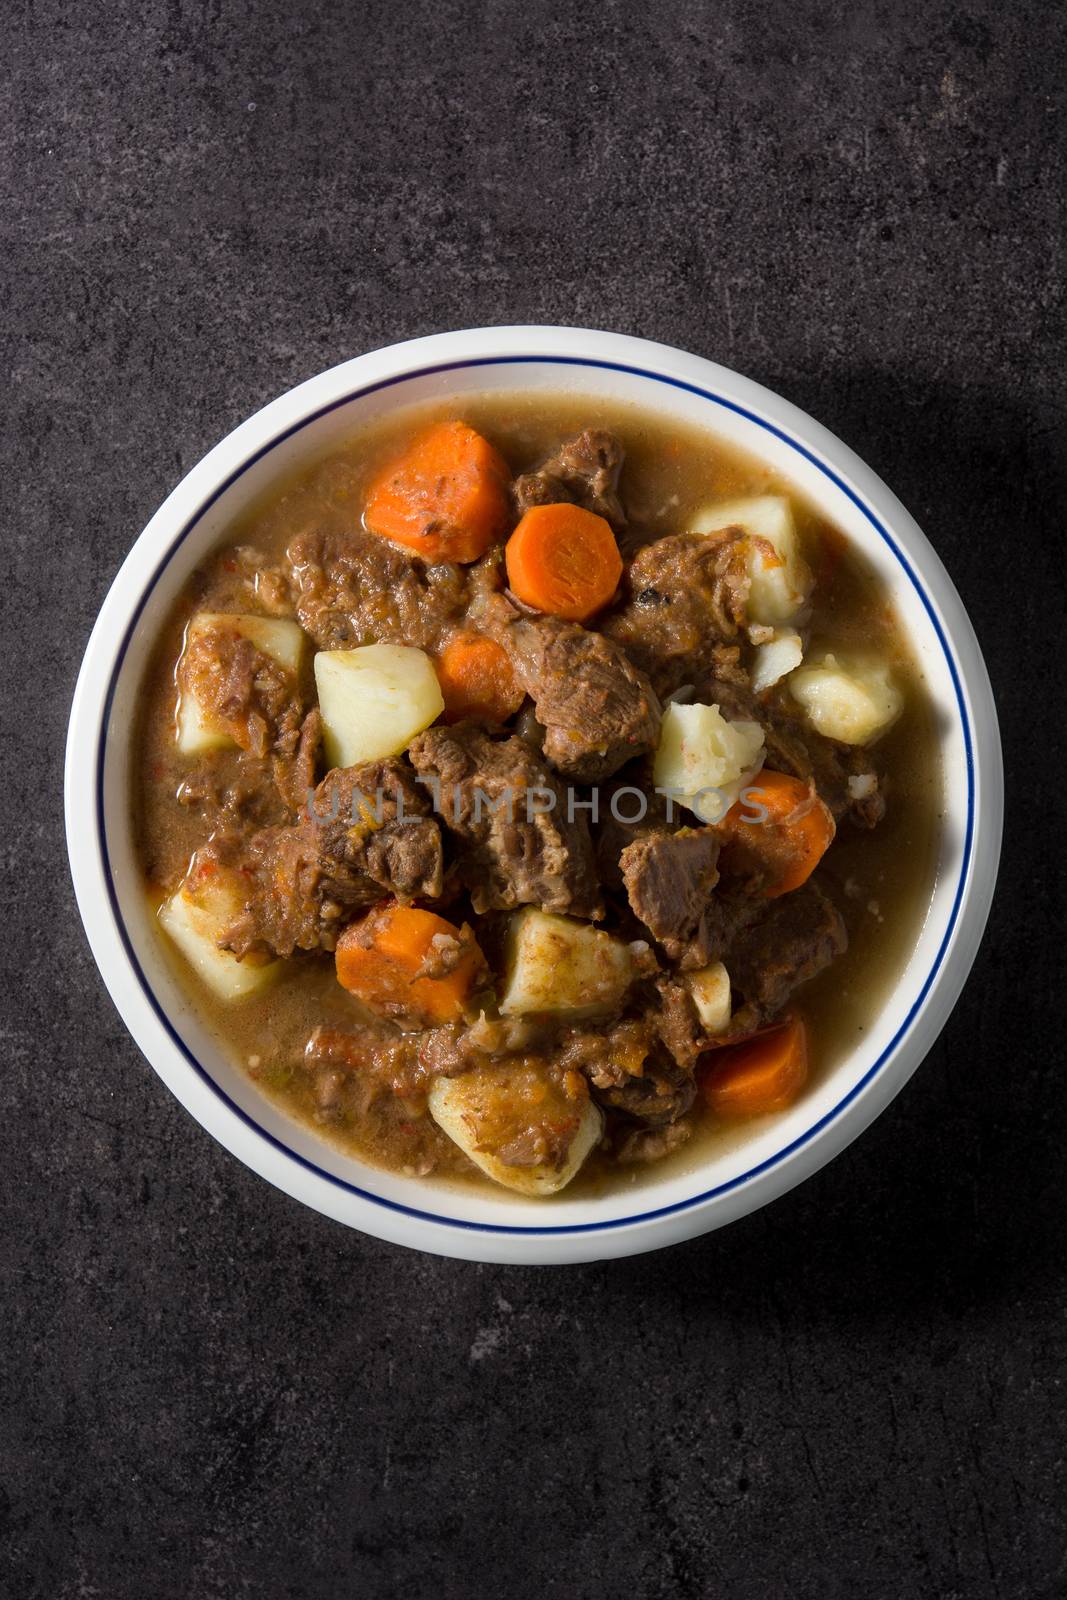 Irish beef stew with carrots and potatoes  by chandlervid85